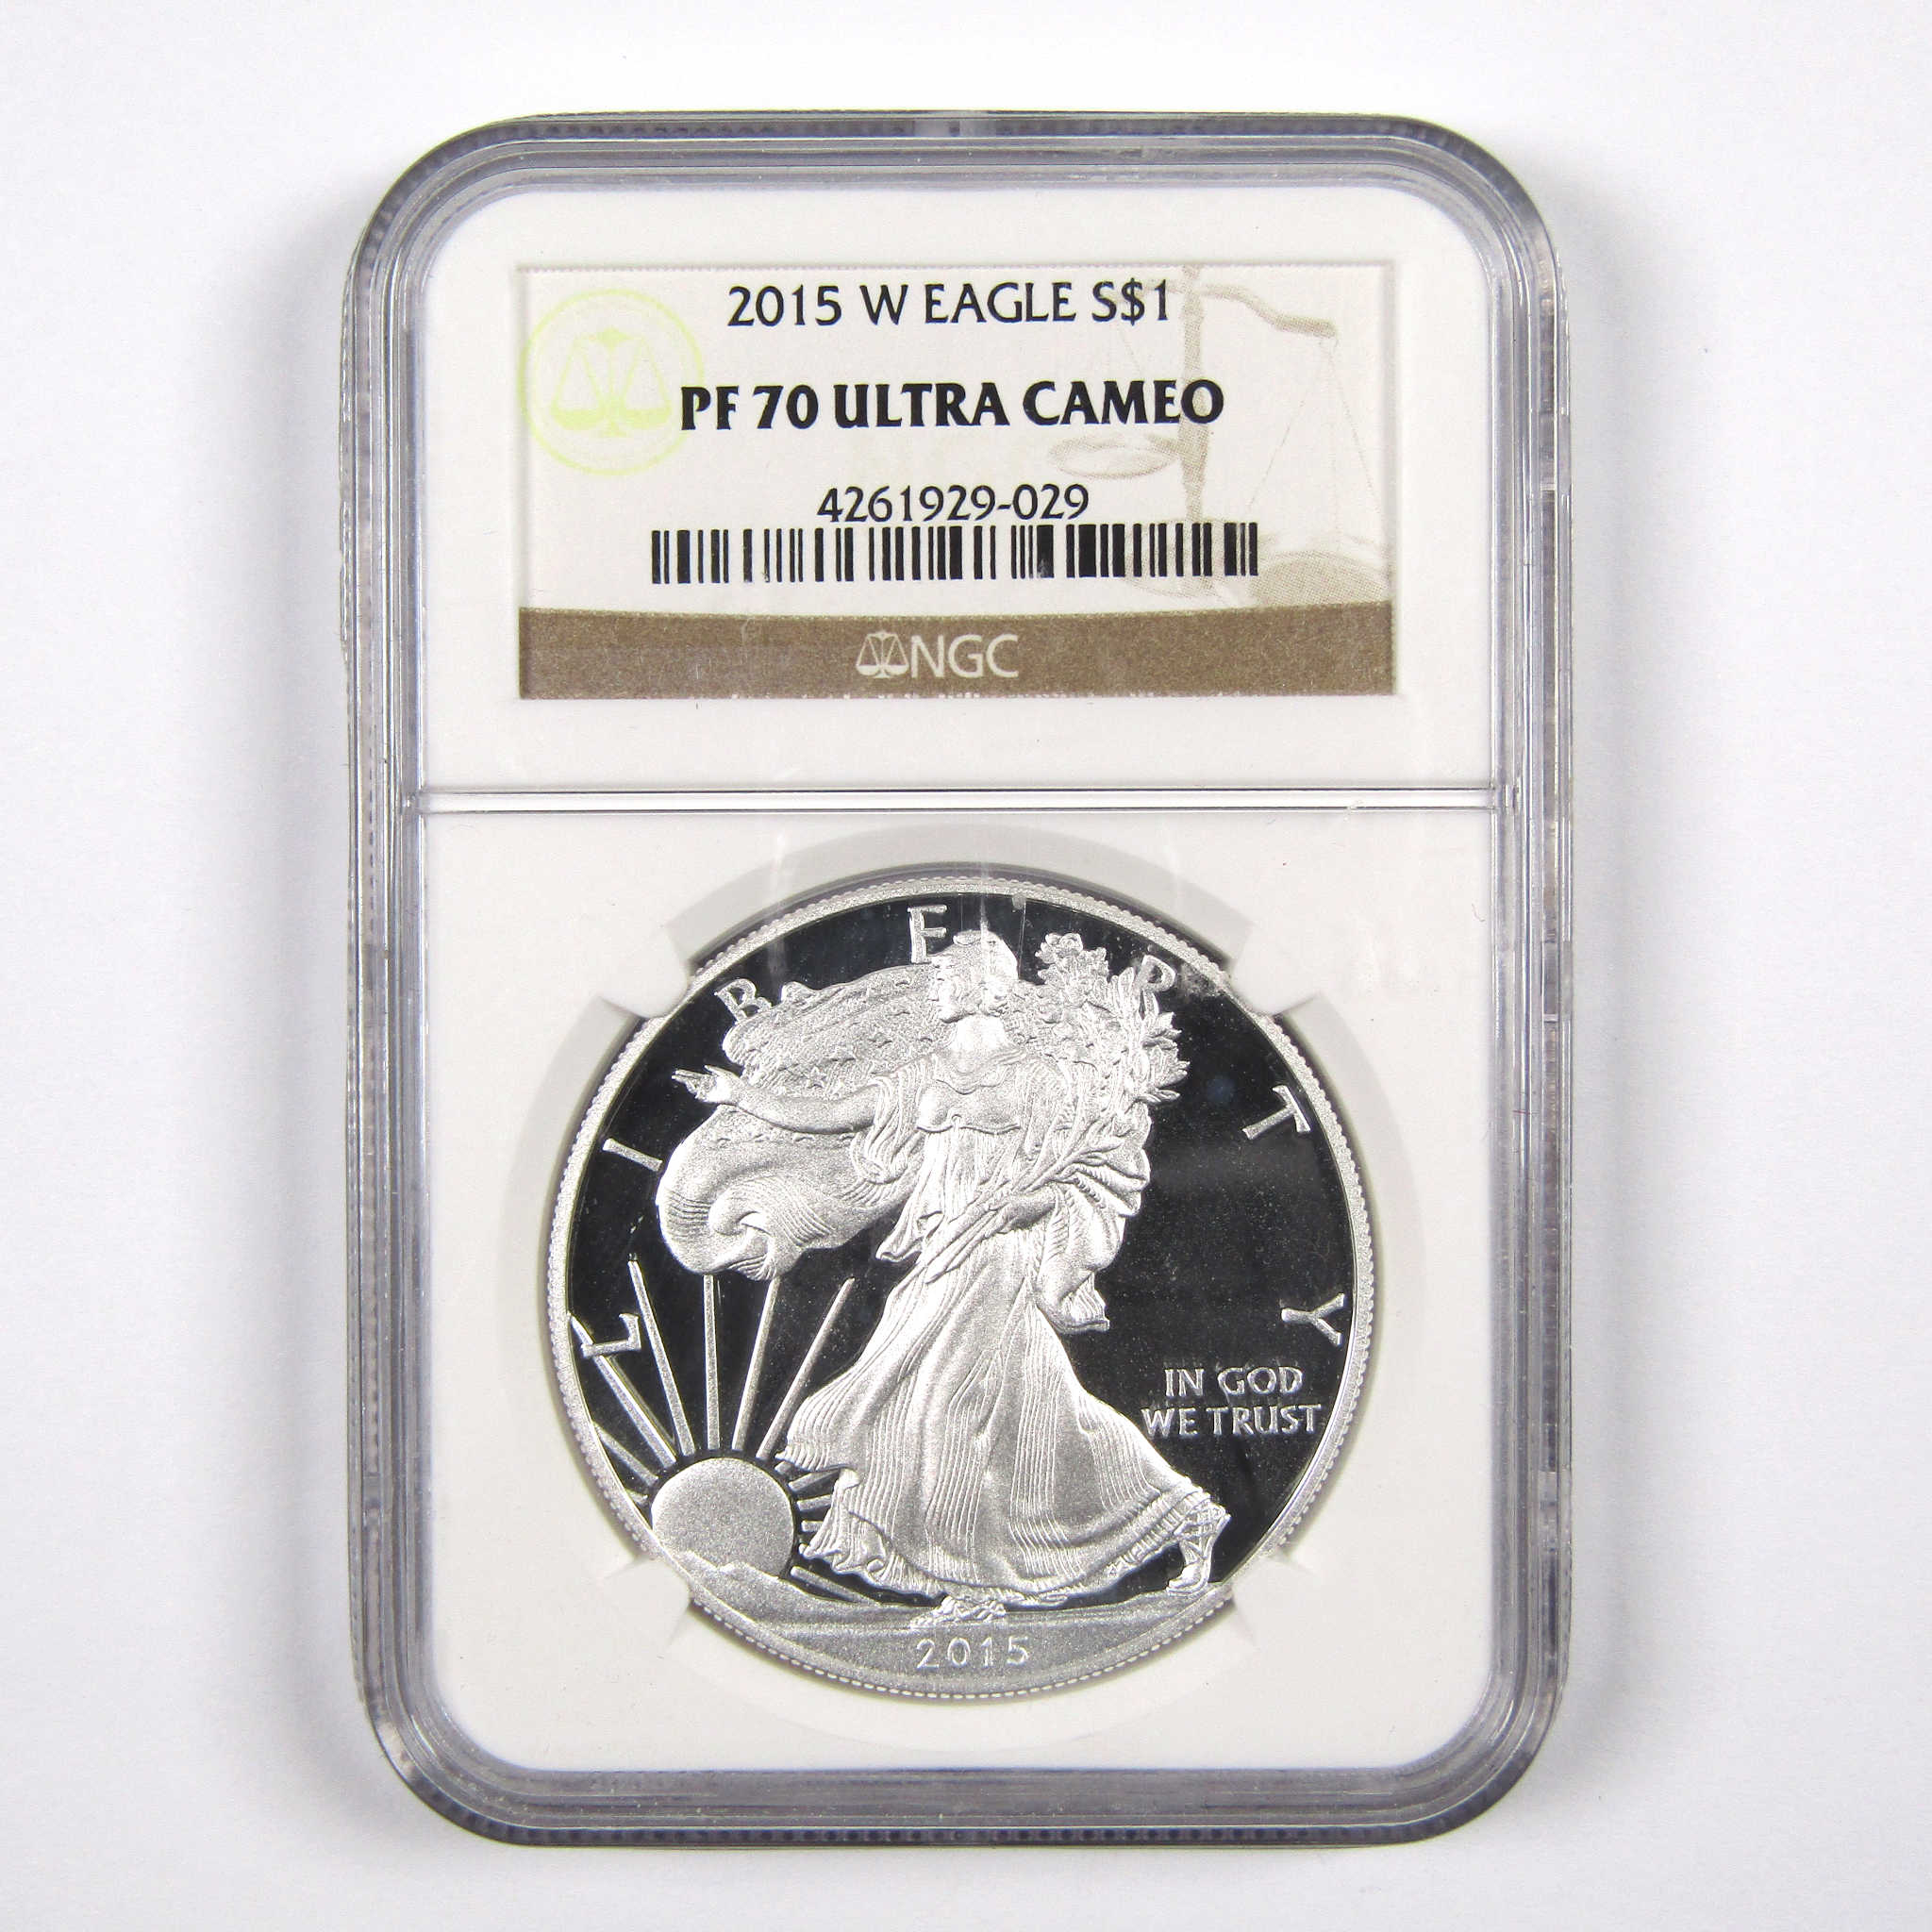 2015 W American Silver Eagle PF 70 UCAM NGC $1 Proof Coin SKU:CPC3032